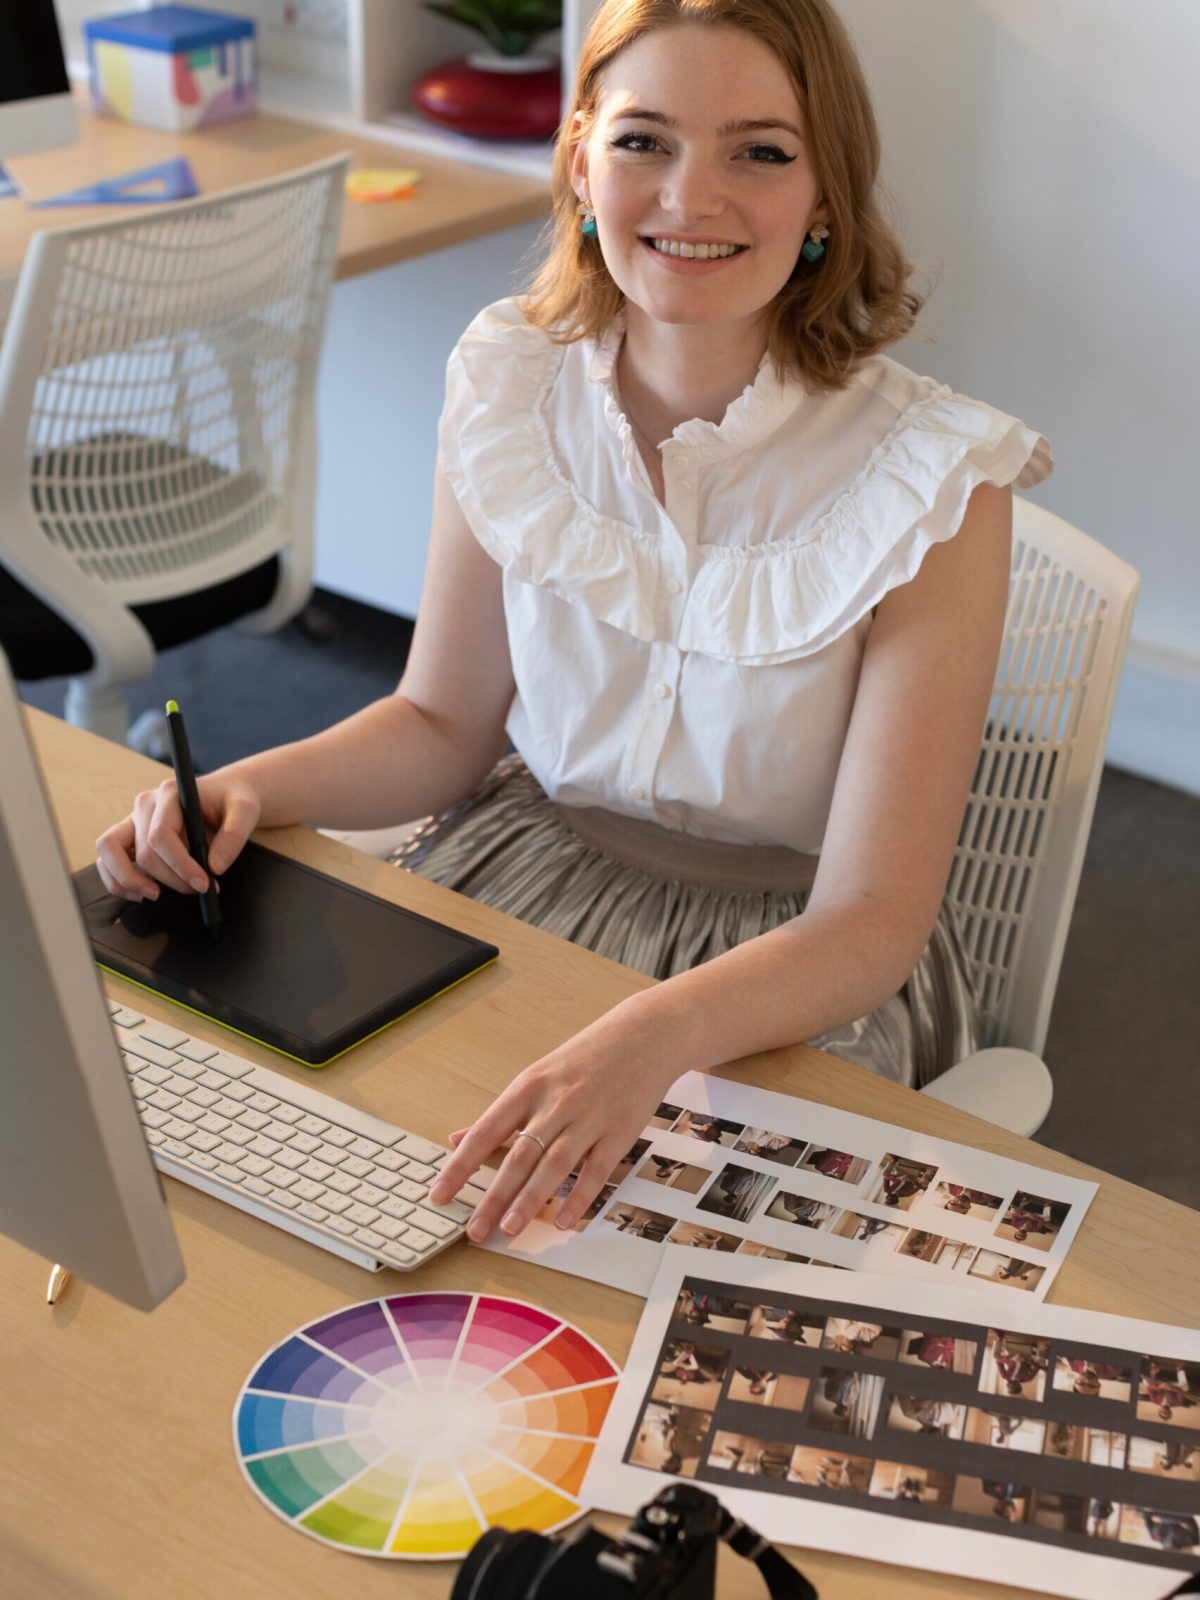 Portrait of young Caucasian female graphic designer working on graphics tablet and computer at desk in the office. She is smiling and looking at camera